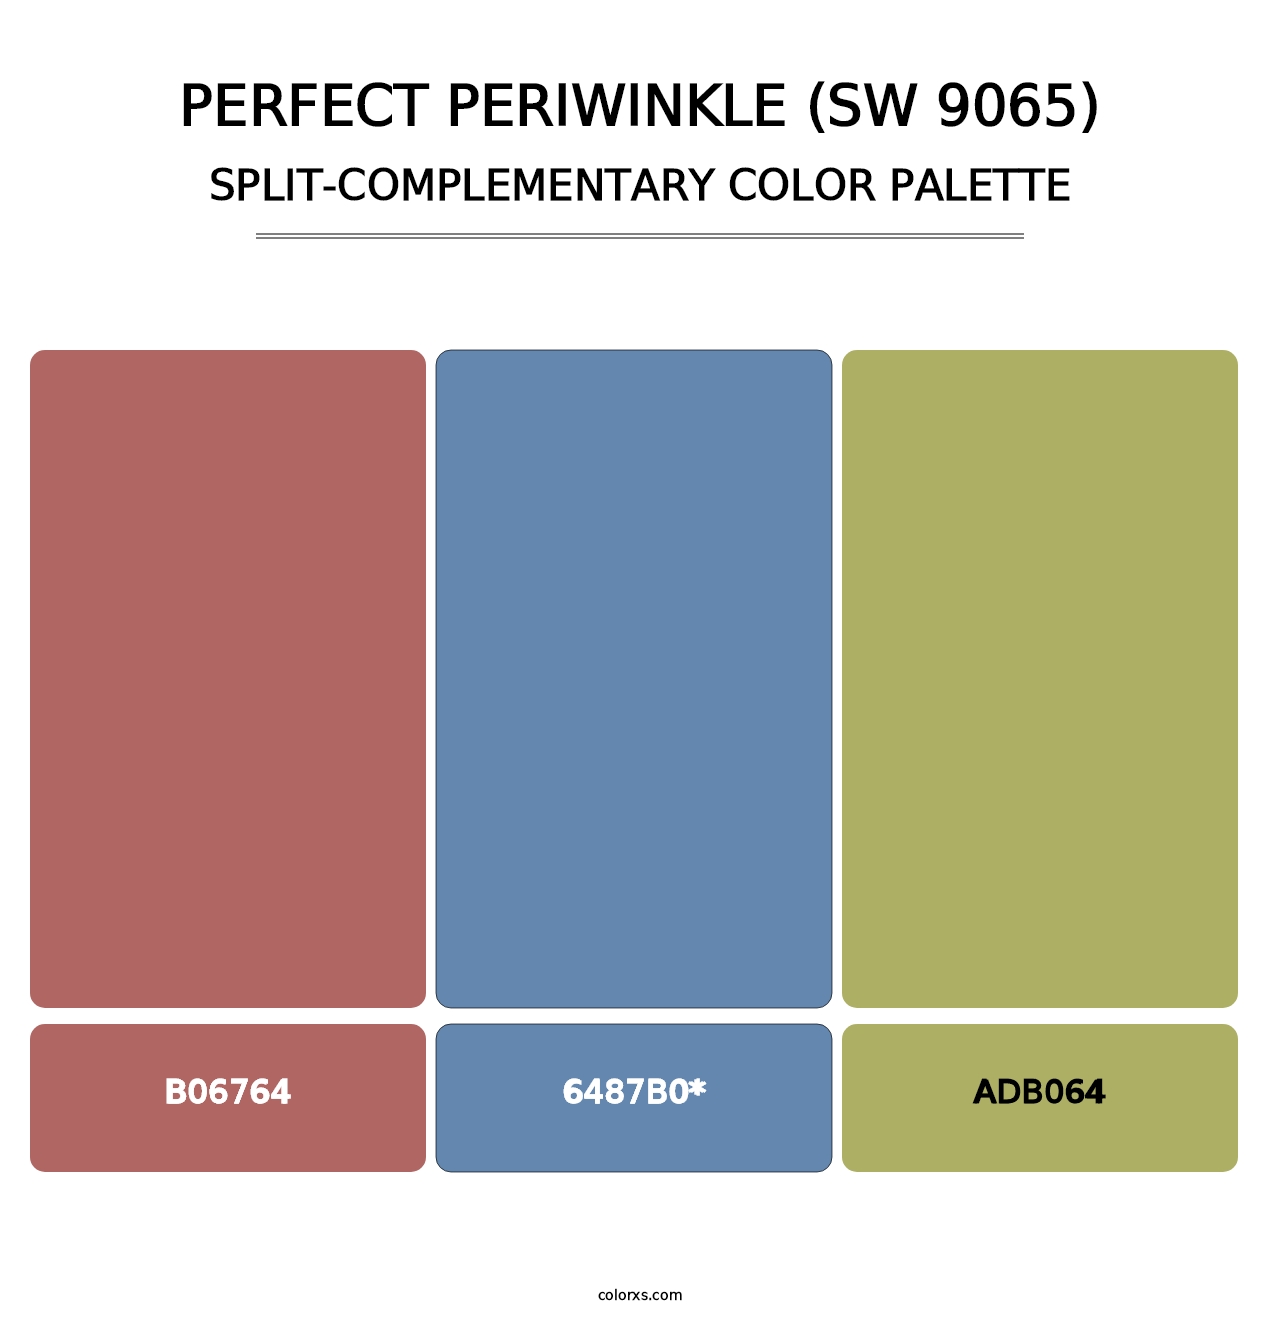 Perfect Periwinkle (SW 9065) - Split-Complementary Color Palette